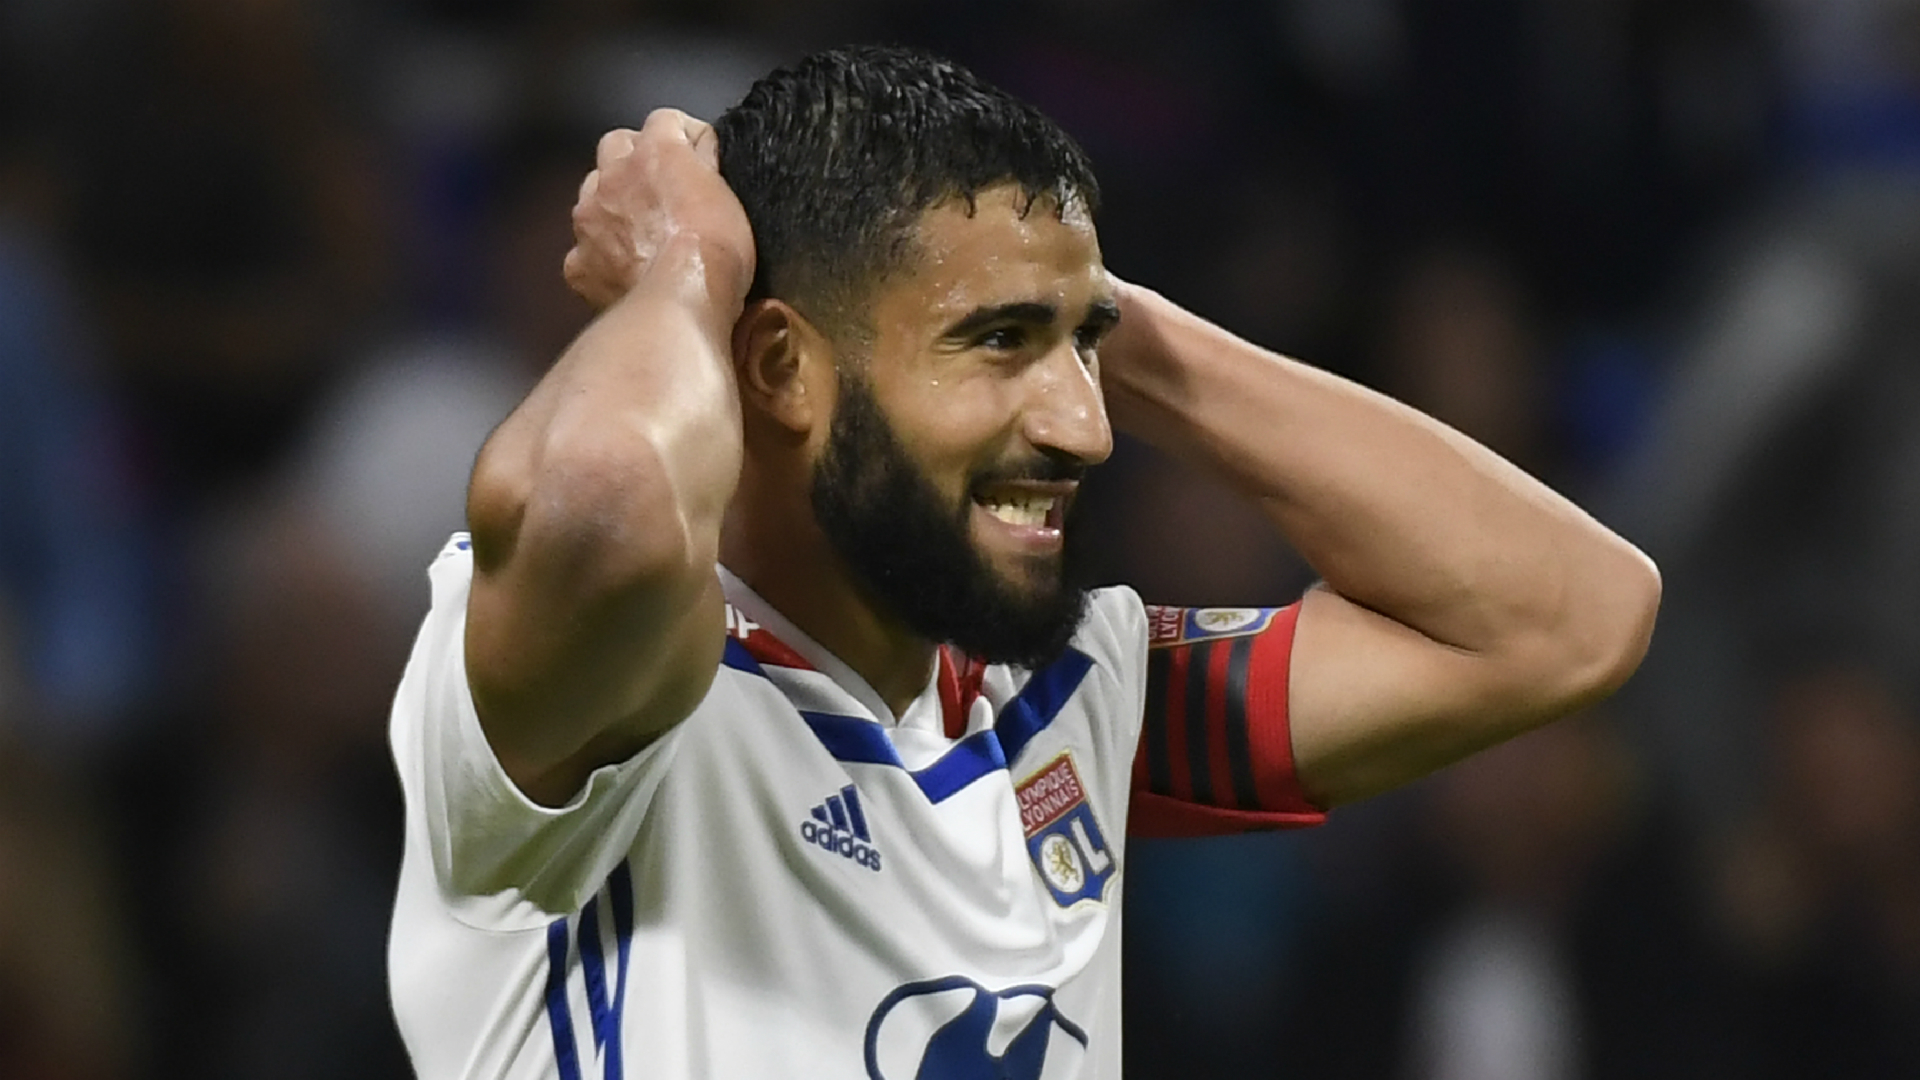 Paulo Fonseca lauded Nabil Fekir's "genius goal", but the Lyon star insisted the decisive draw with Shakhtar Donetsk was a team effort.